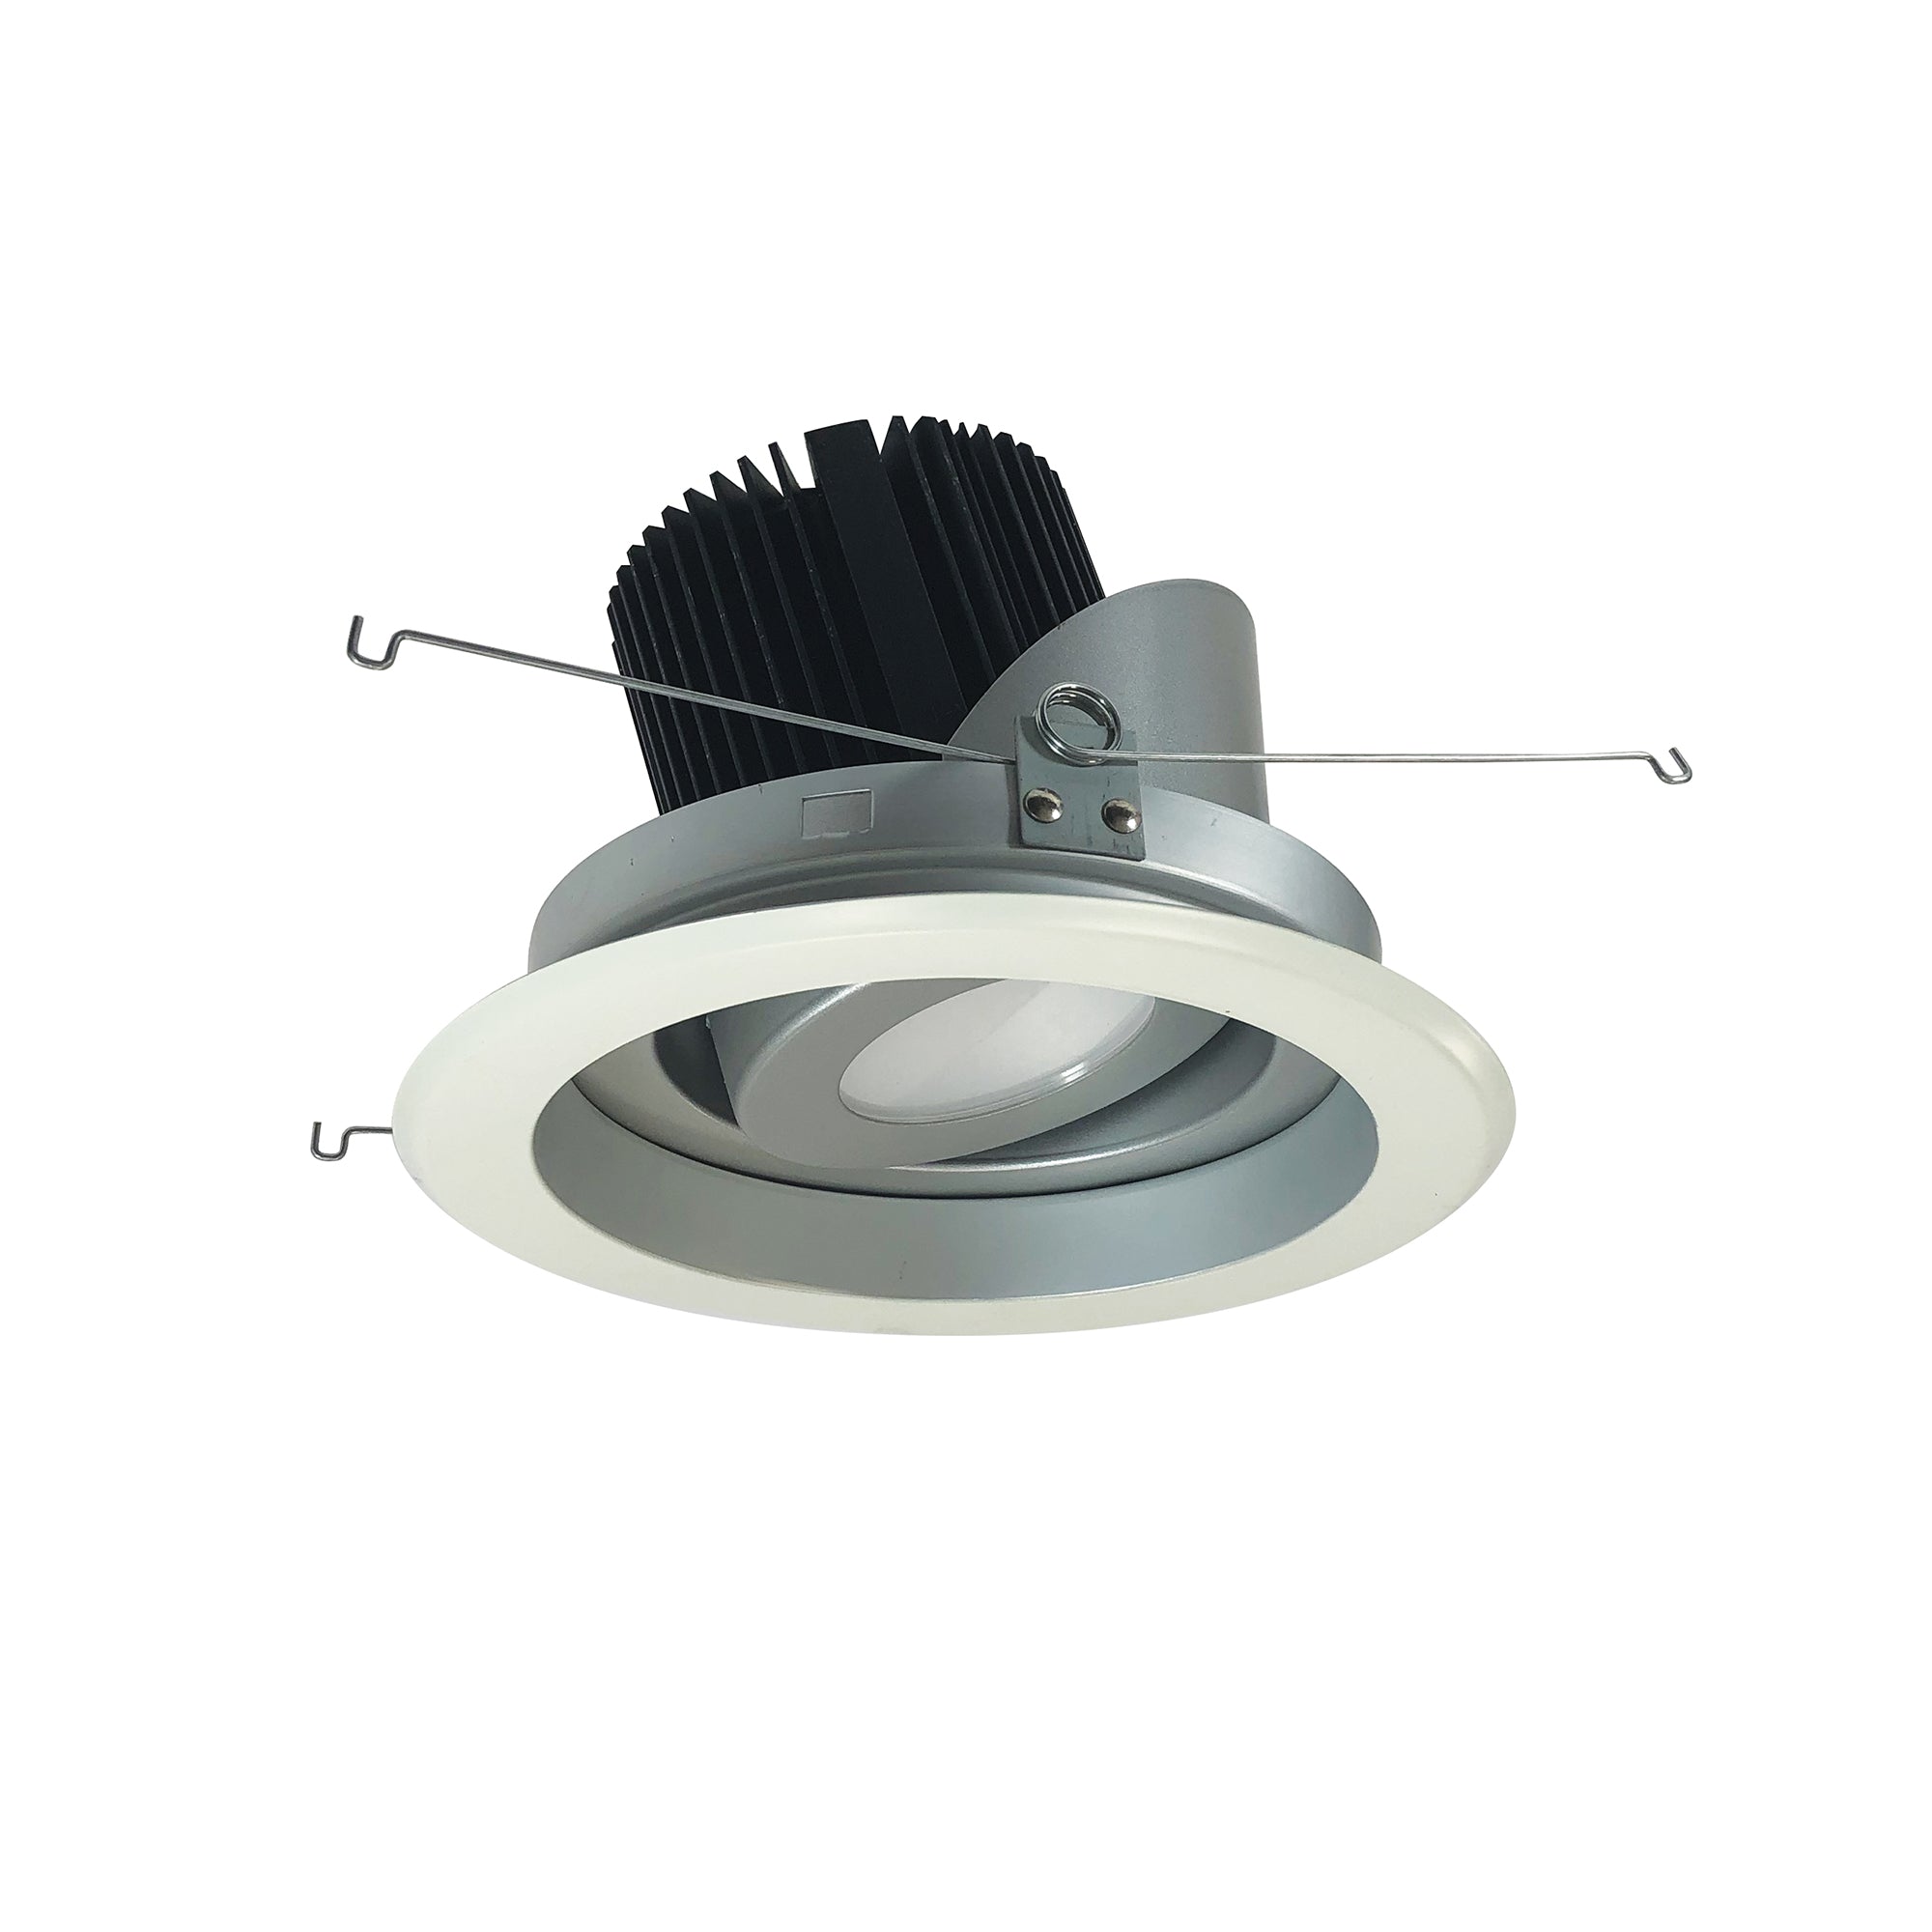 Nora Lighting NRM2-619L2540SHZW - Recessed - 6 Inch Marquise II Round Regressed Adj. Reflector, Spot, 2500lm, 4000K, Haze/White (Not Compatible with NHRM2-625 Housings)